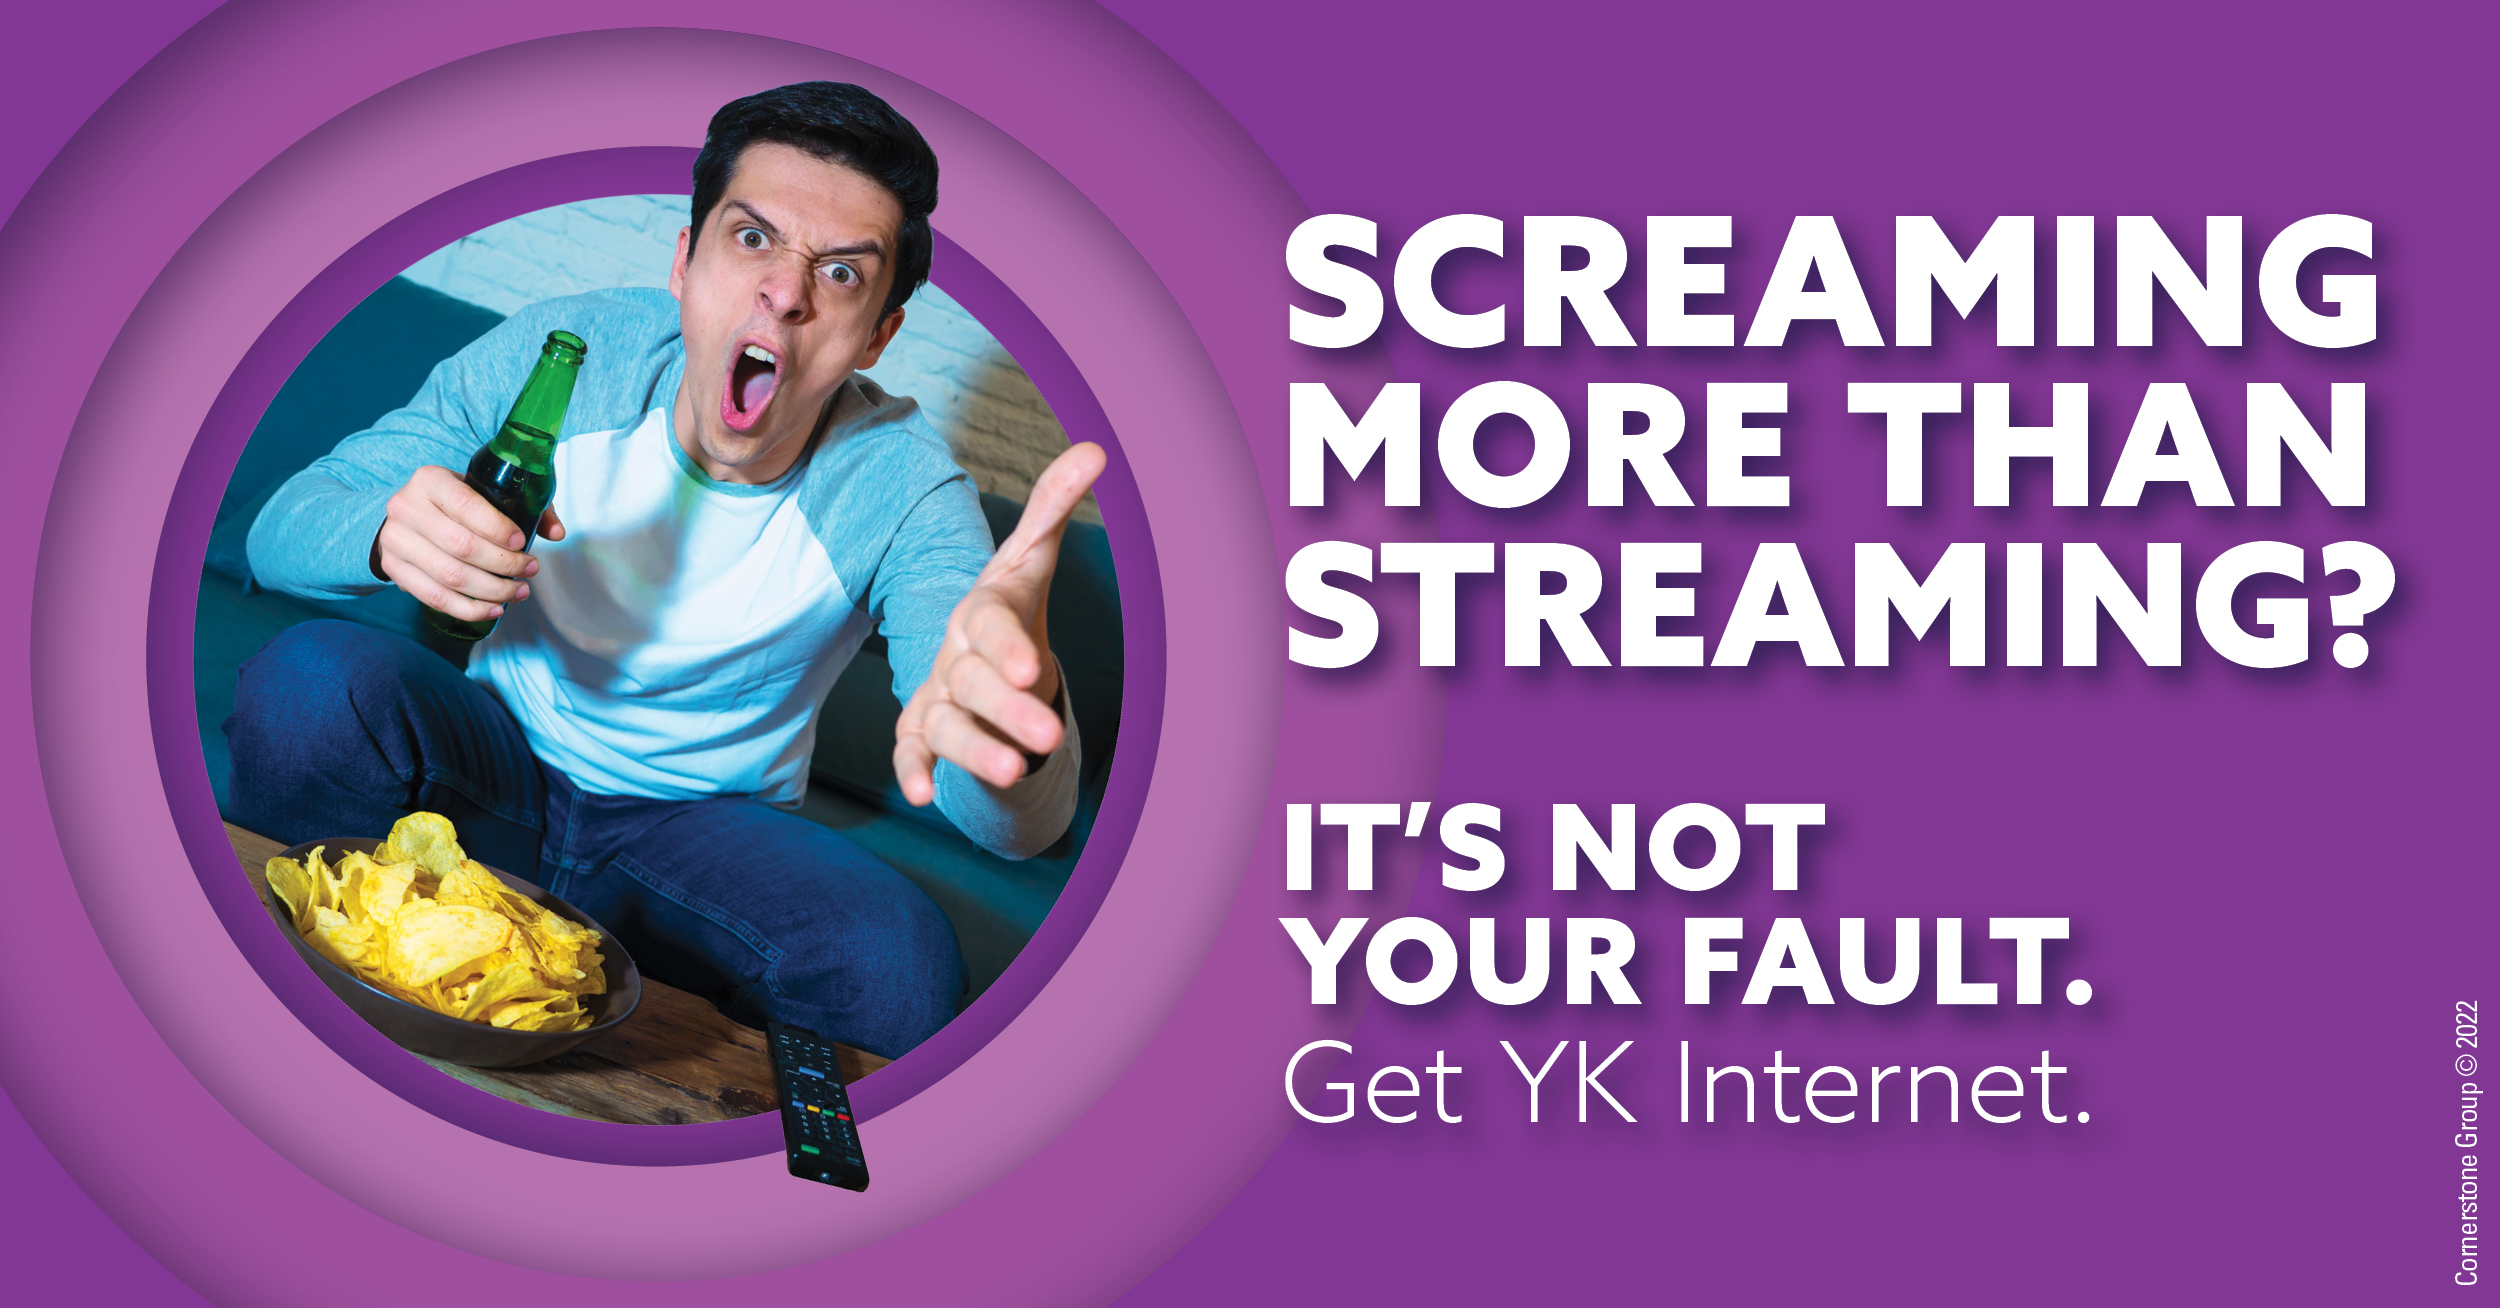 YKC - screaming more than streaming - tags wholesome, family-friendly